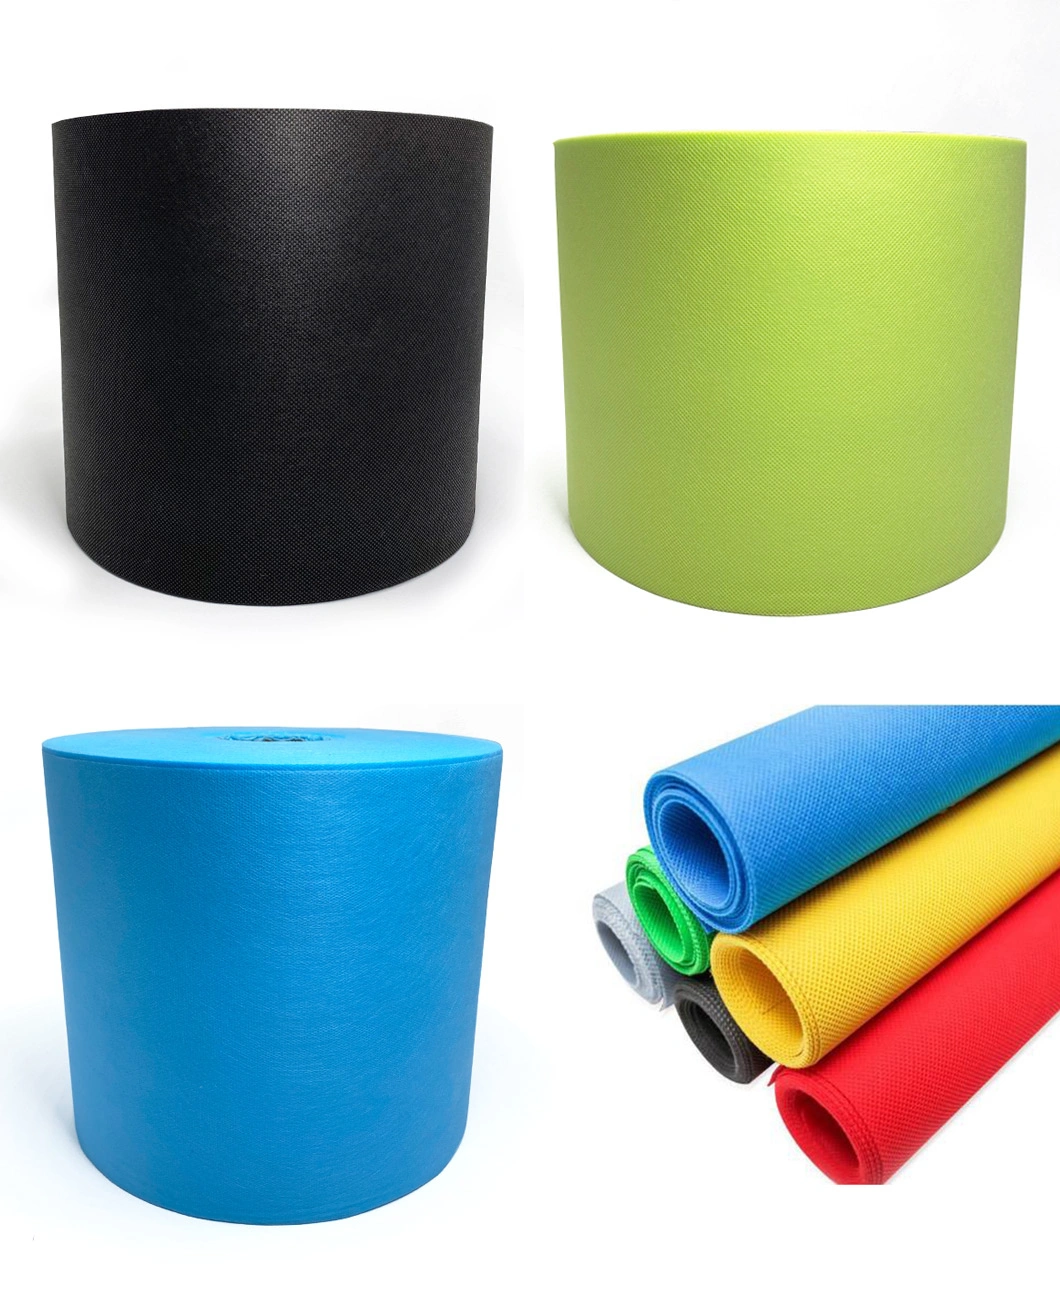 PP Polypropylene Spunbond Nonwoven Fabric TNT Rolls for Packaging Medical Agricultural Industrial & Home Non Woven Fabric